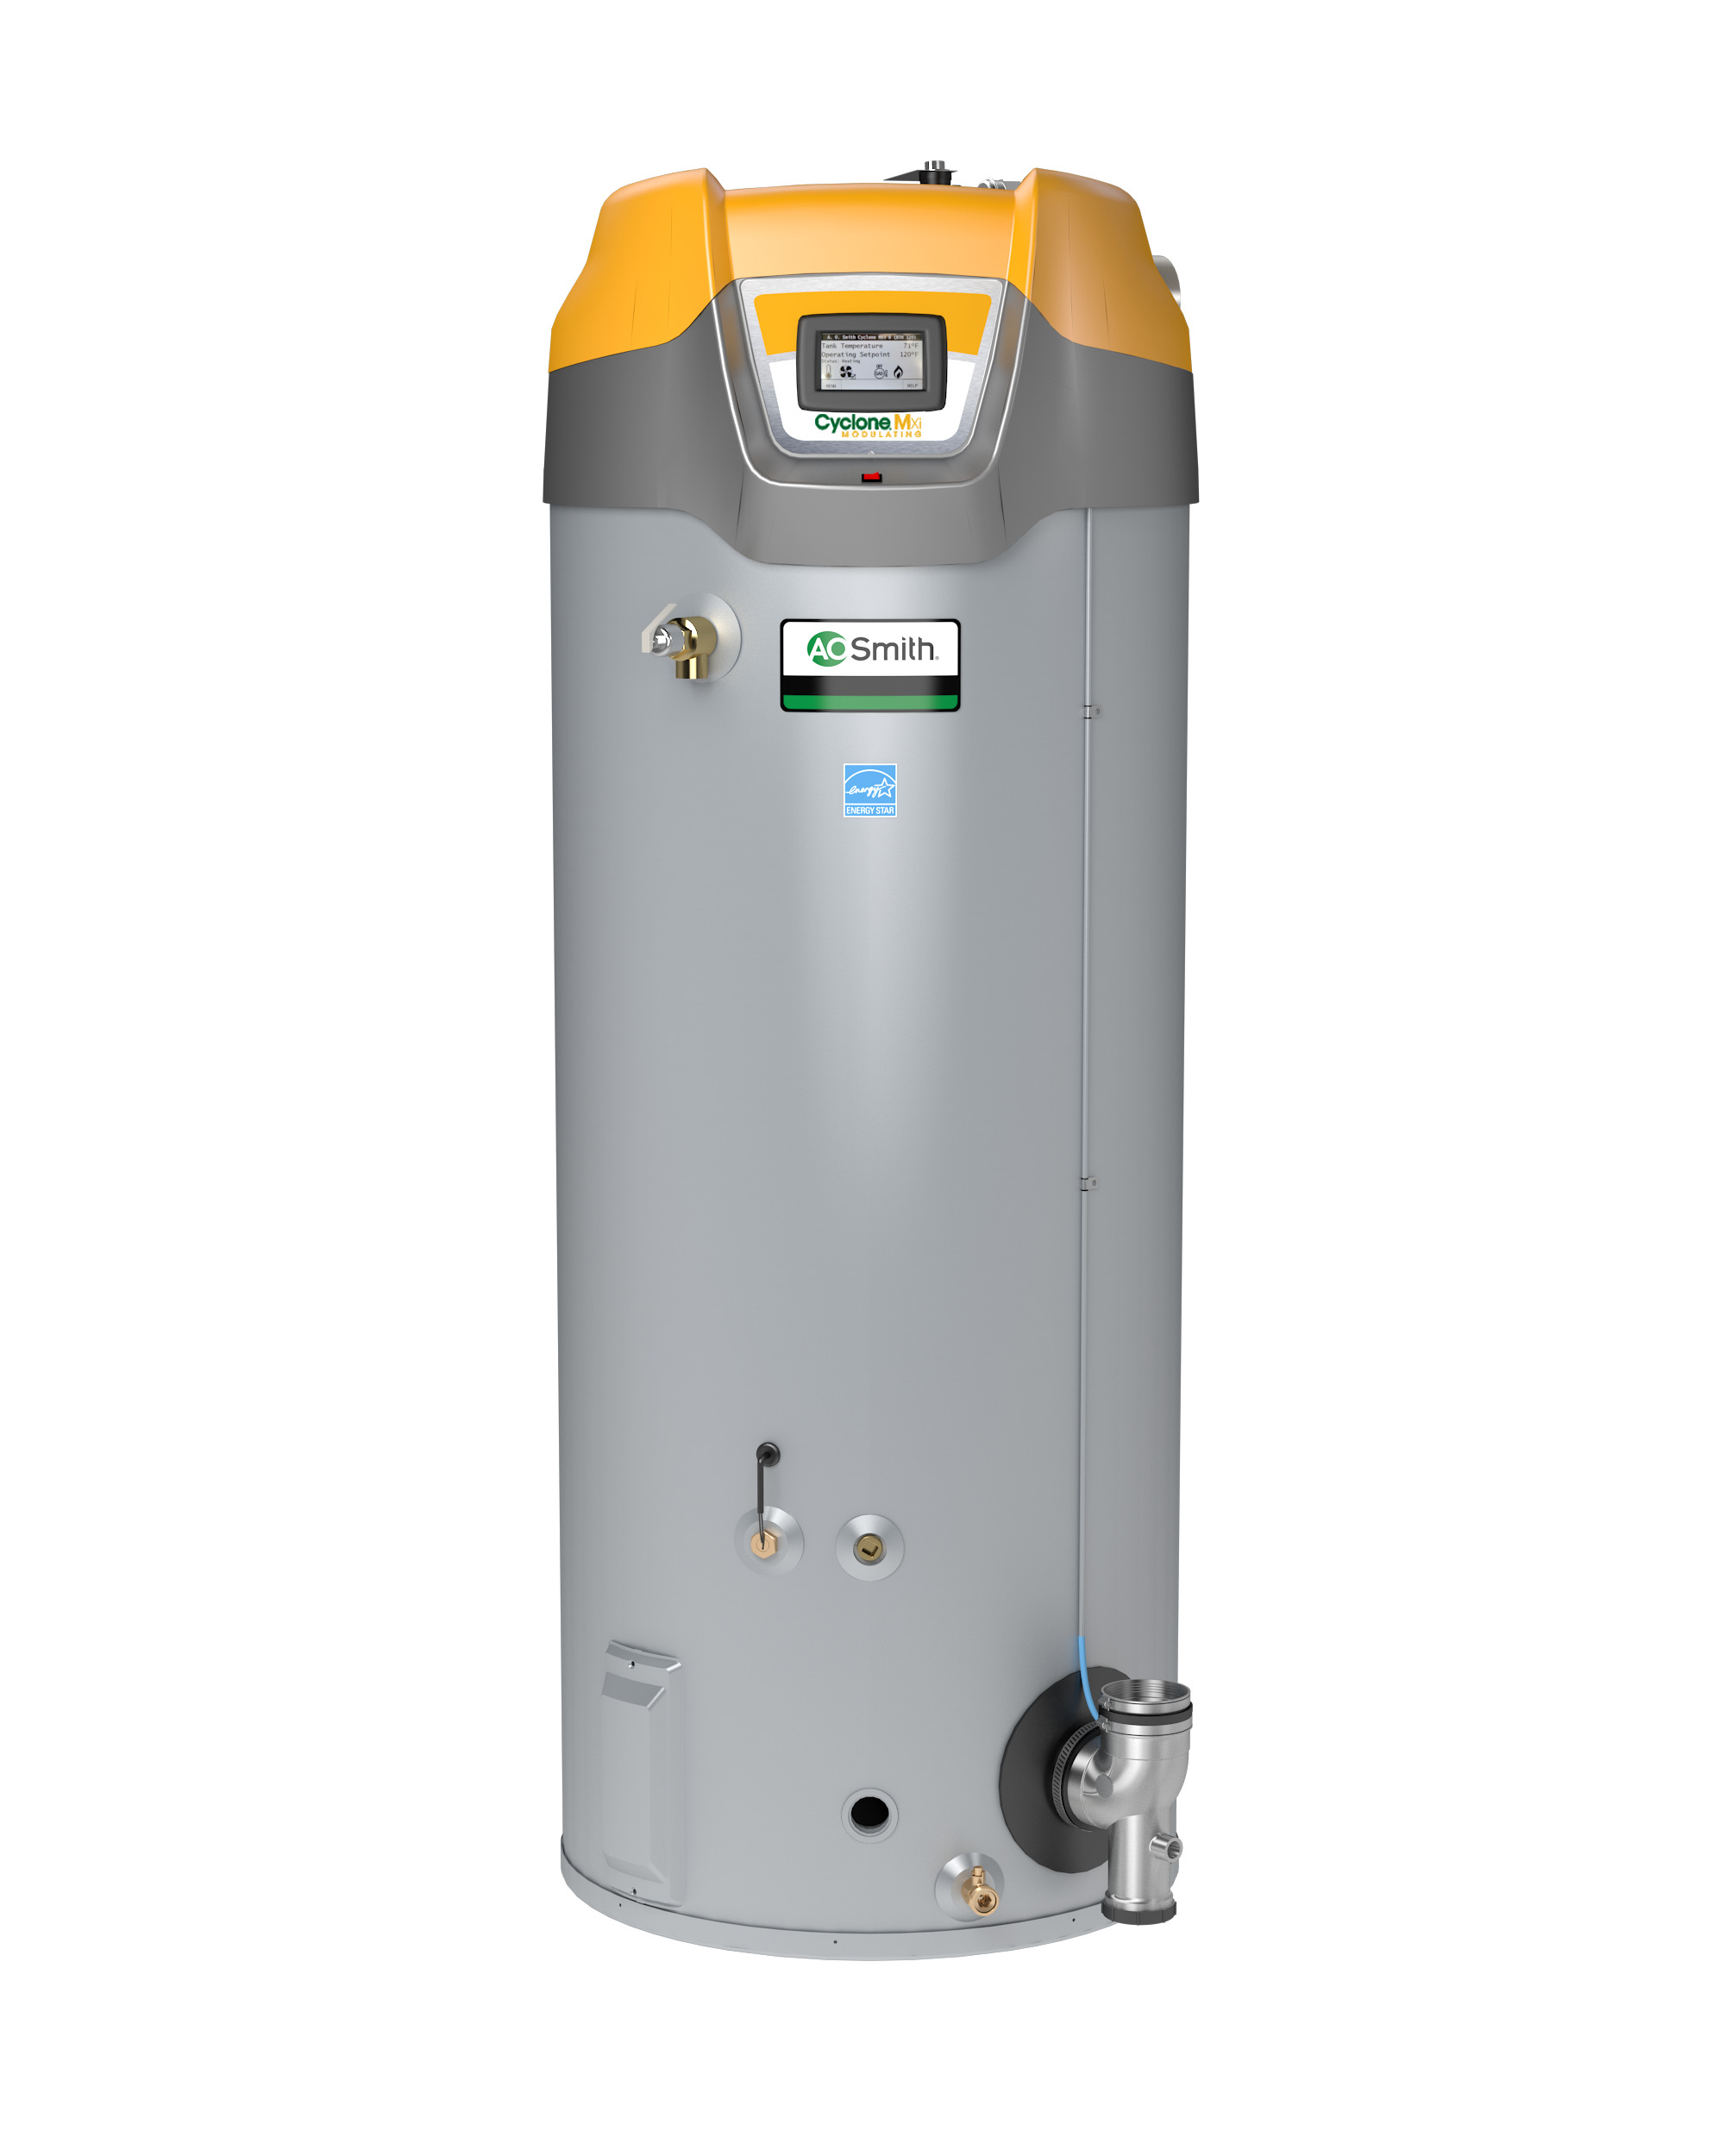 AO SMITH BTH-300A-LP: 119 GALLON, 300,000-BTU, UP TO 96% THERMAL EFFICIENCY, ASME, 4" VENT, LP (LIQUID PROPANE) CYCLONE Mxi MODULATING COMMERCIAL GAS WATER HEATER